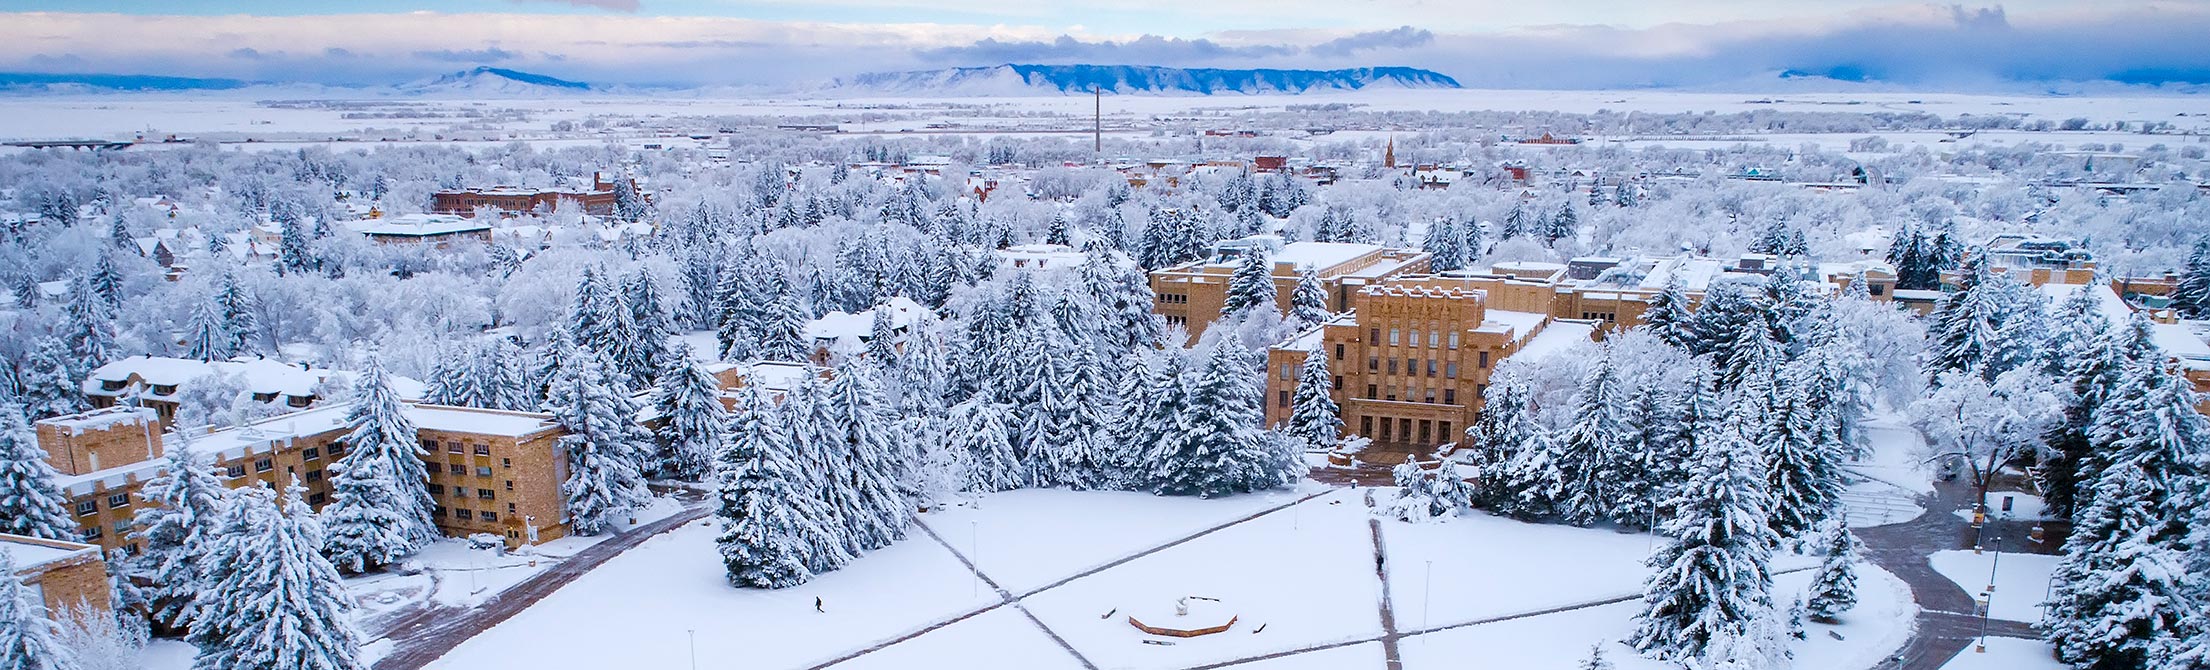 Aerial of Campus with Snow